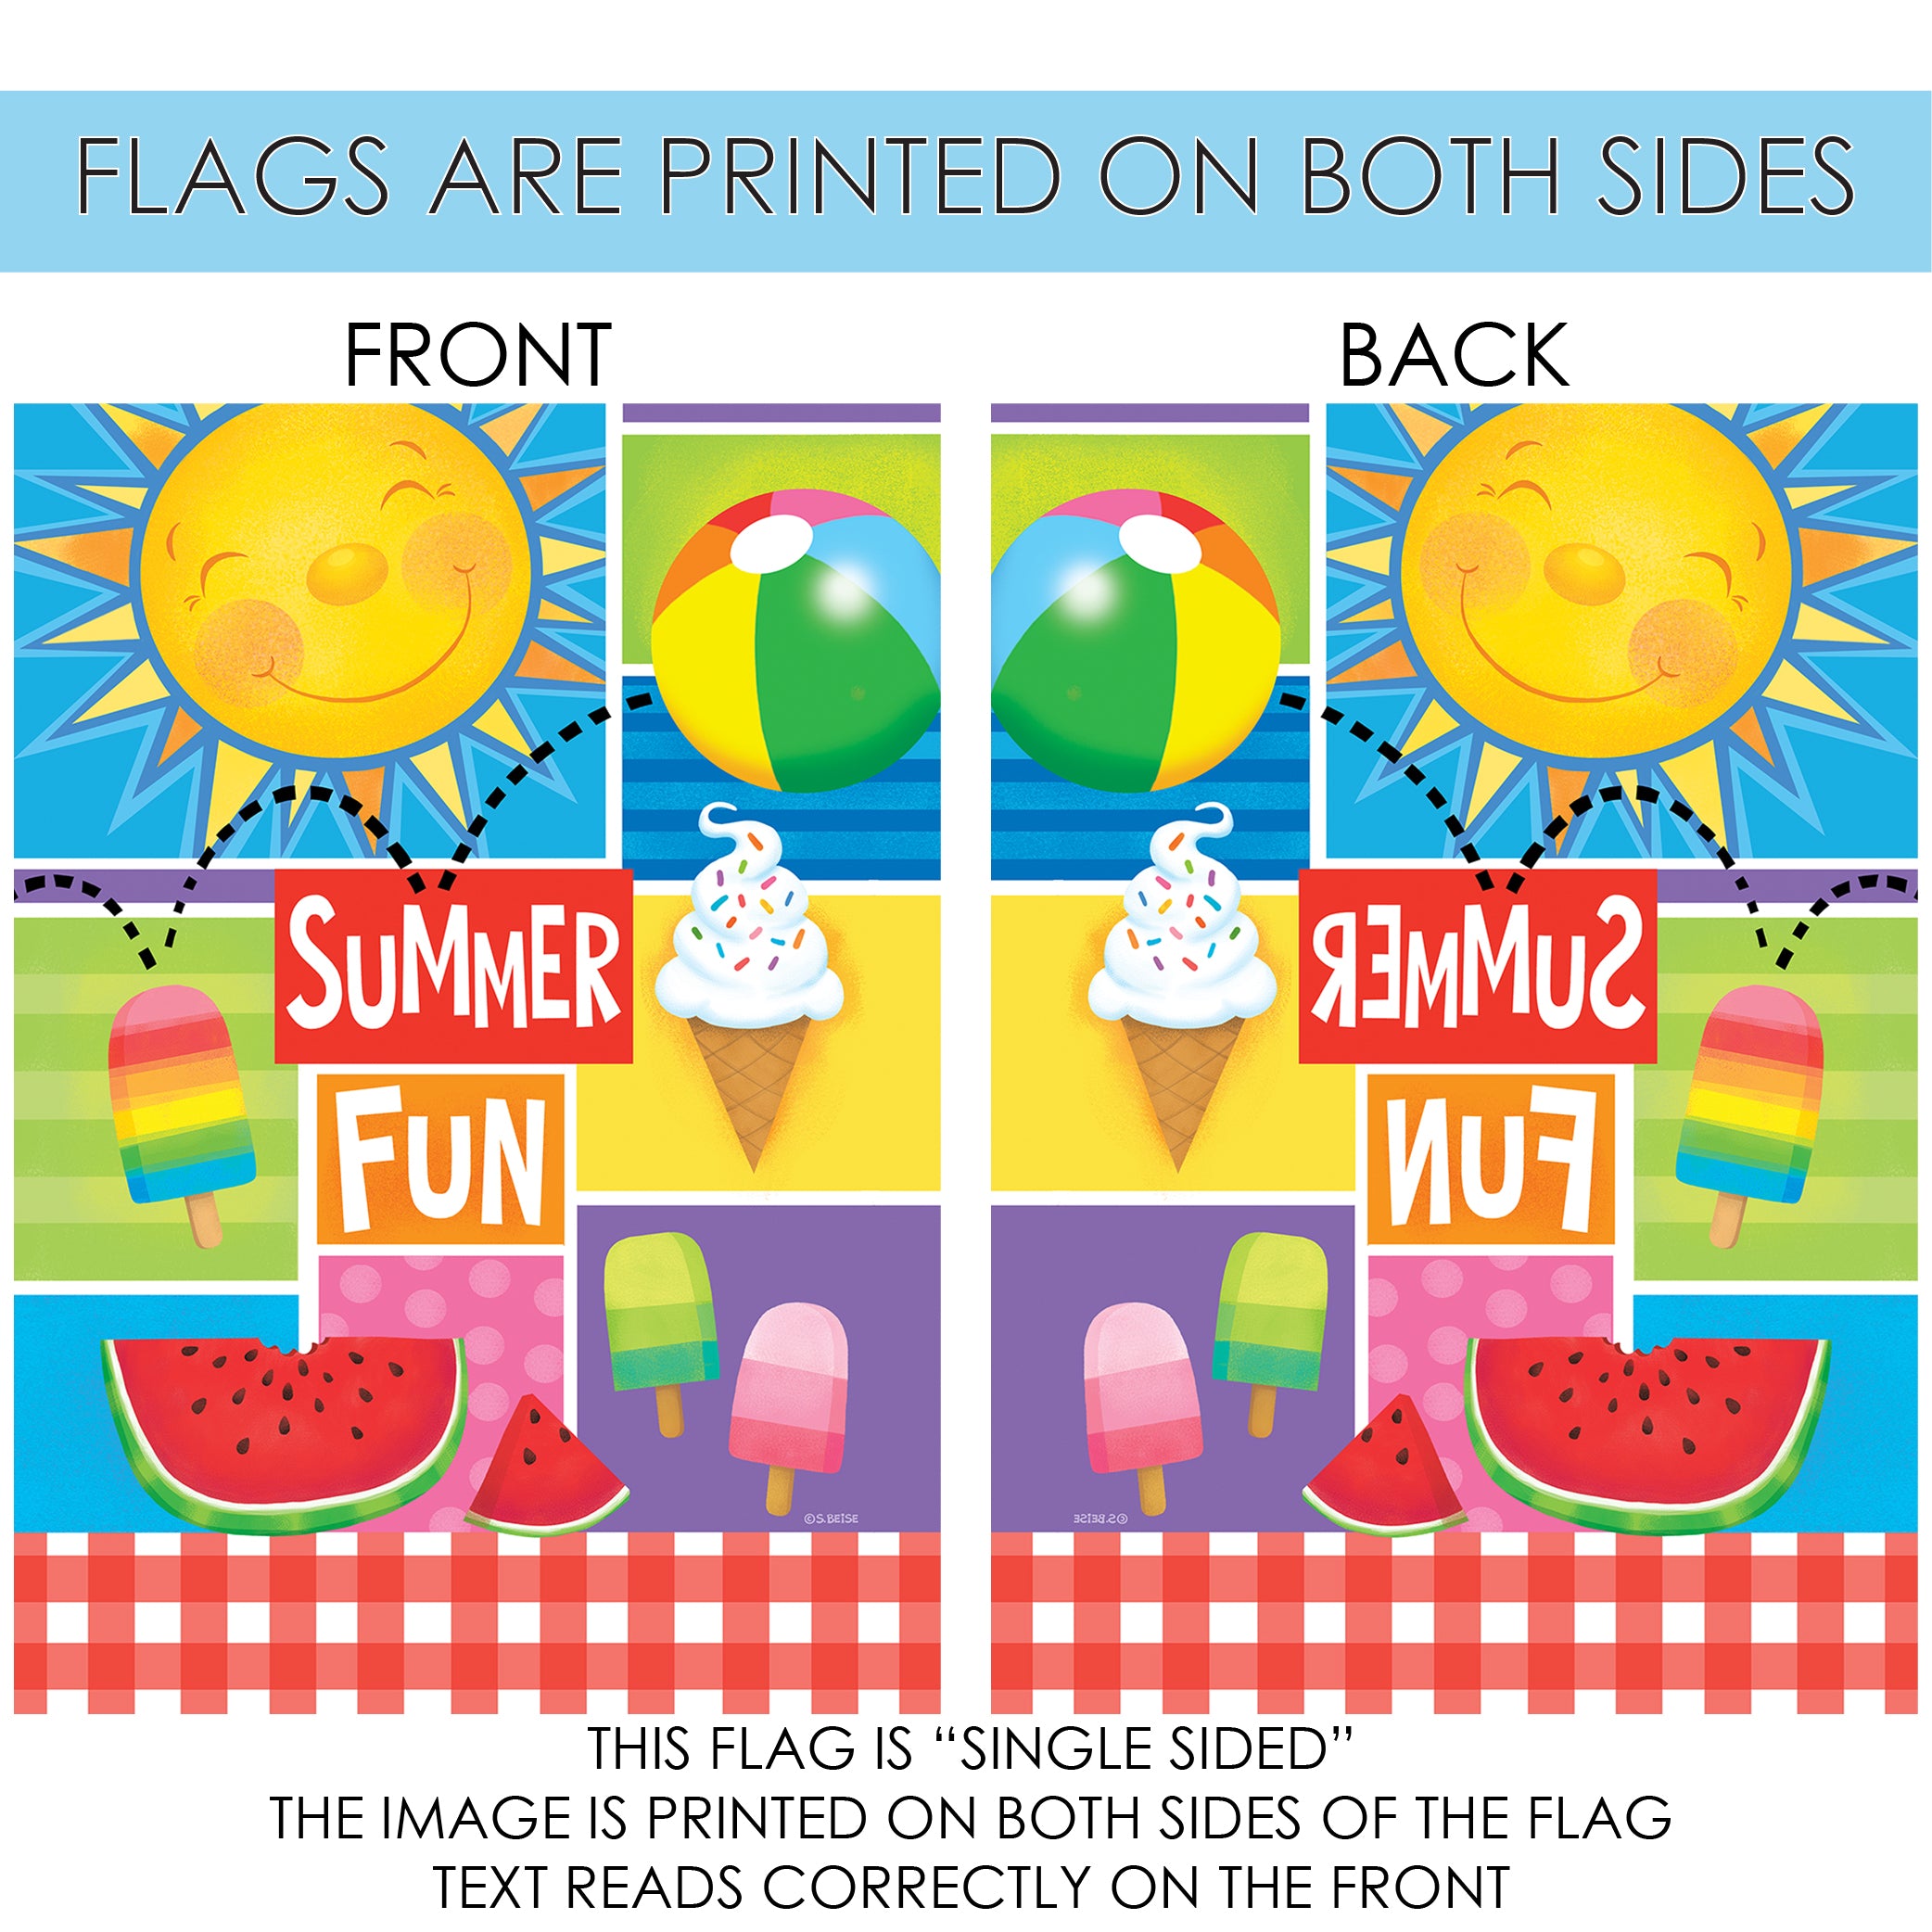 Toland Home Garden Summer Fun Sunshine summer Flag Double Sided 28x40 Inch - image 5 of 5